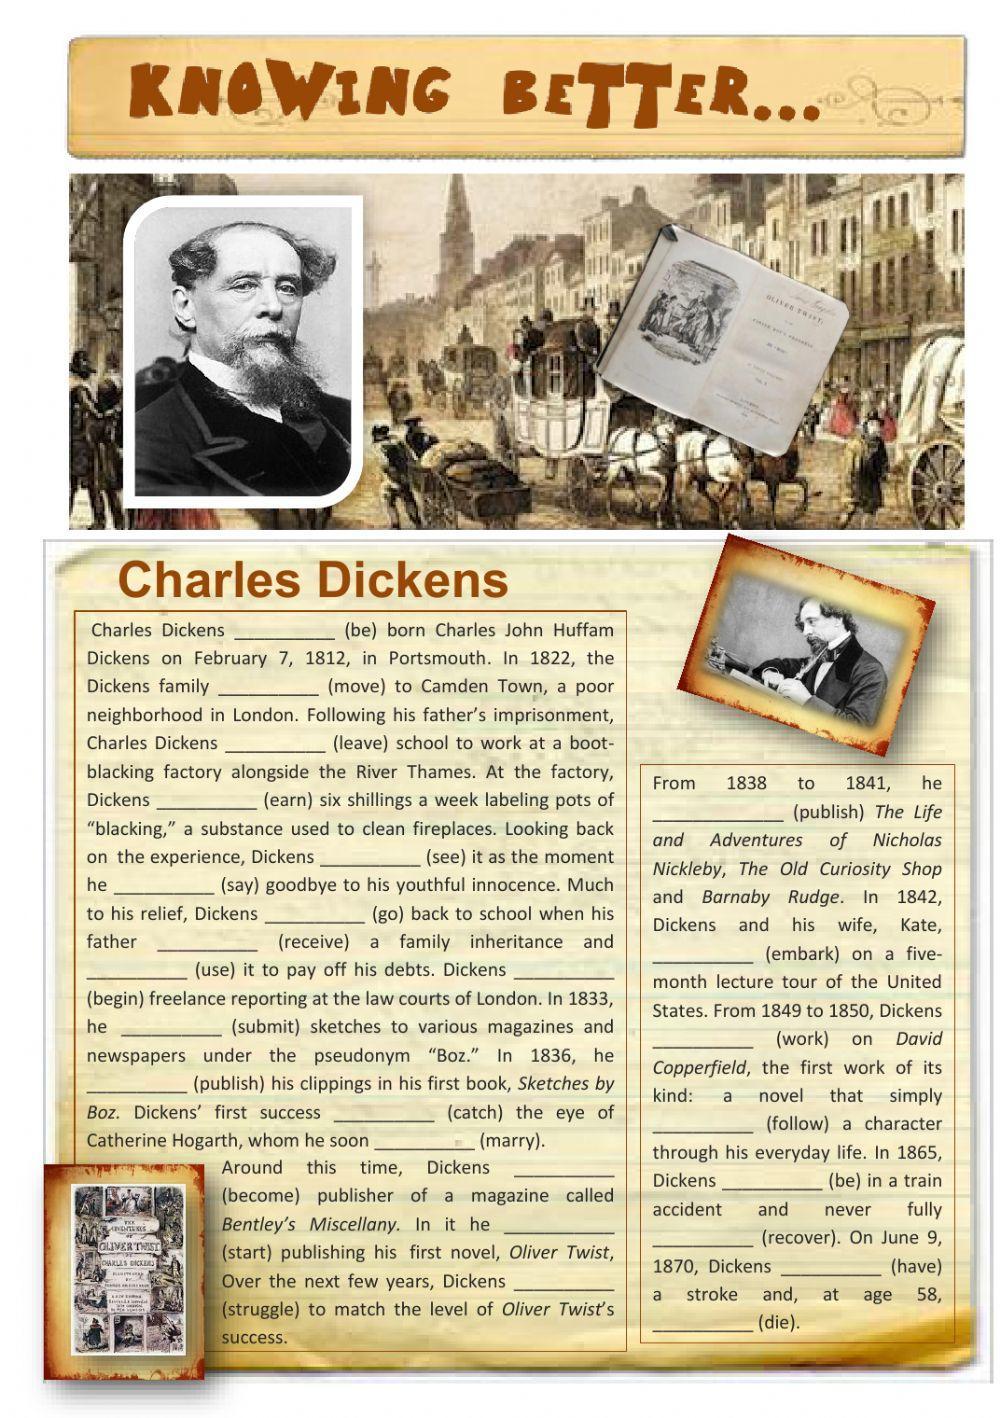 Knowing Better...Charles Dickens